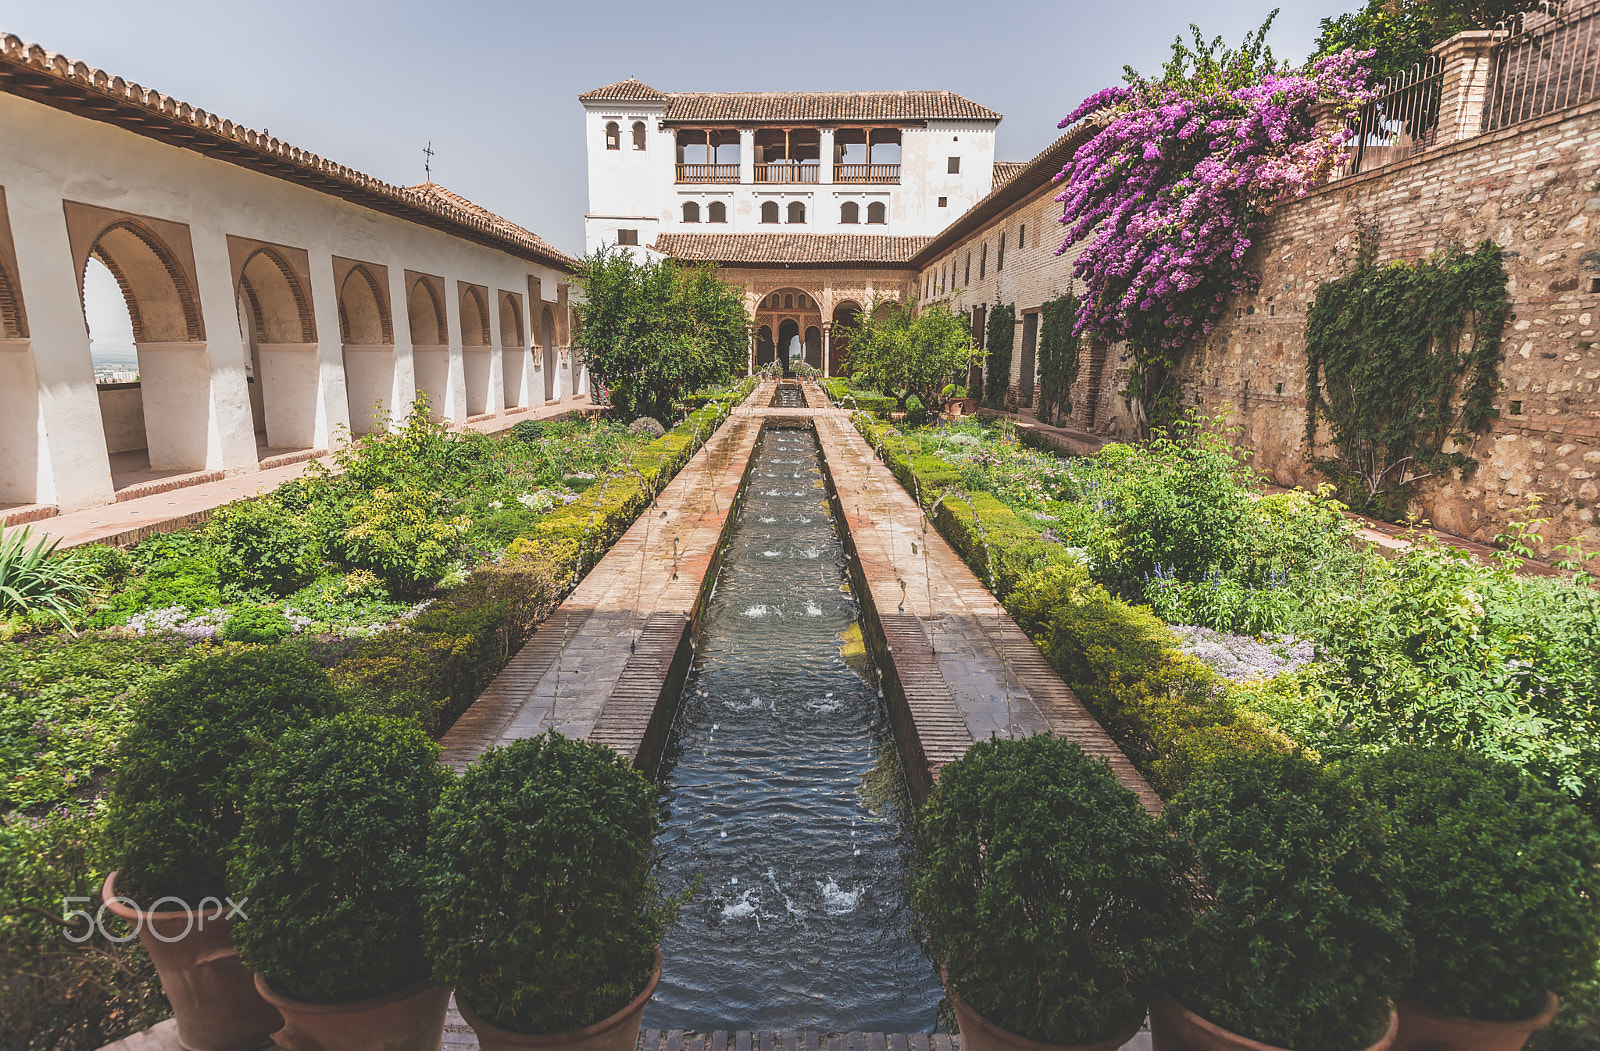 Sony Alpha DSLR-A900 sample photo. Fountains and flowing water  in the palacio de generalife, alham photography